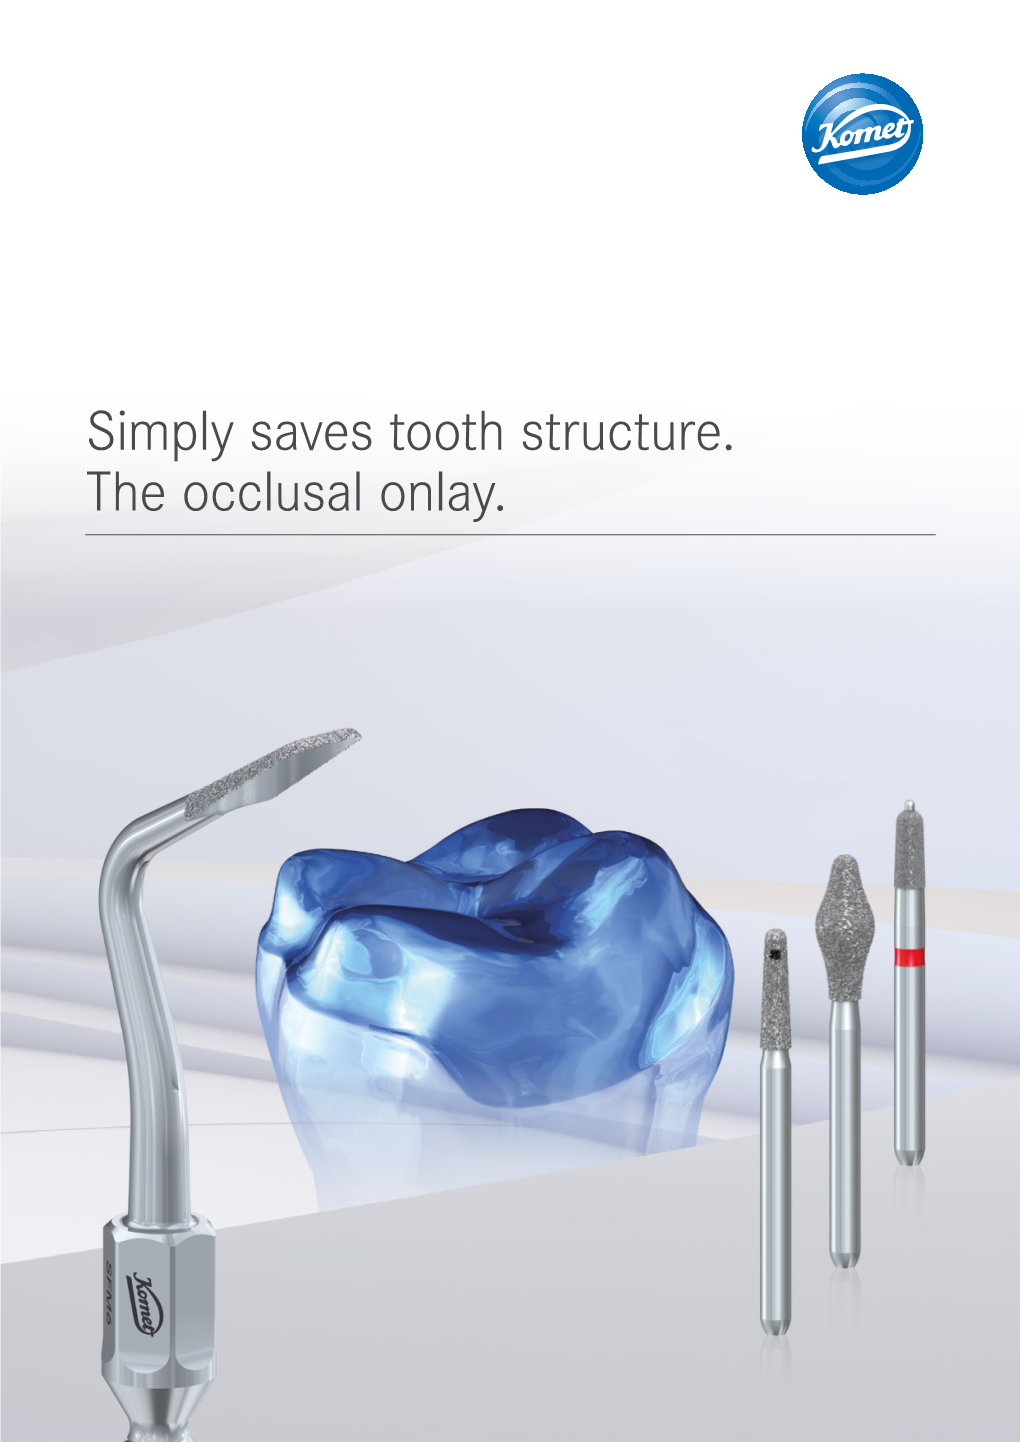 Simply Saves Tooth Structure. the Occlusal Onlay. the Traditional Approach: Advantages: PFM Crowns Are the Traditional Restoration Long-Established Method